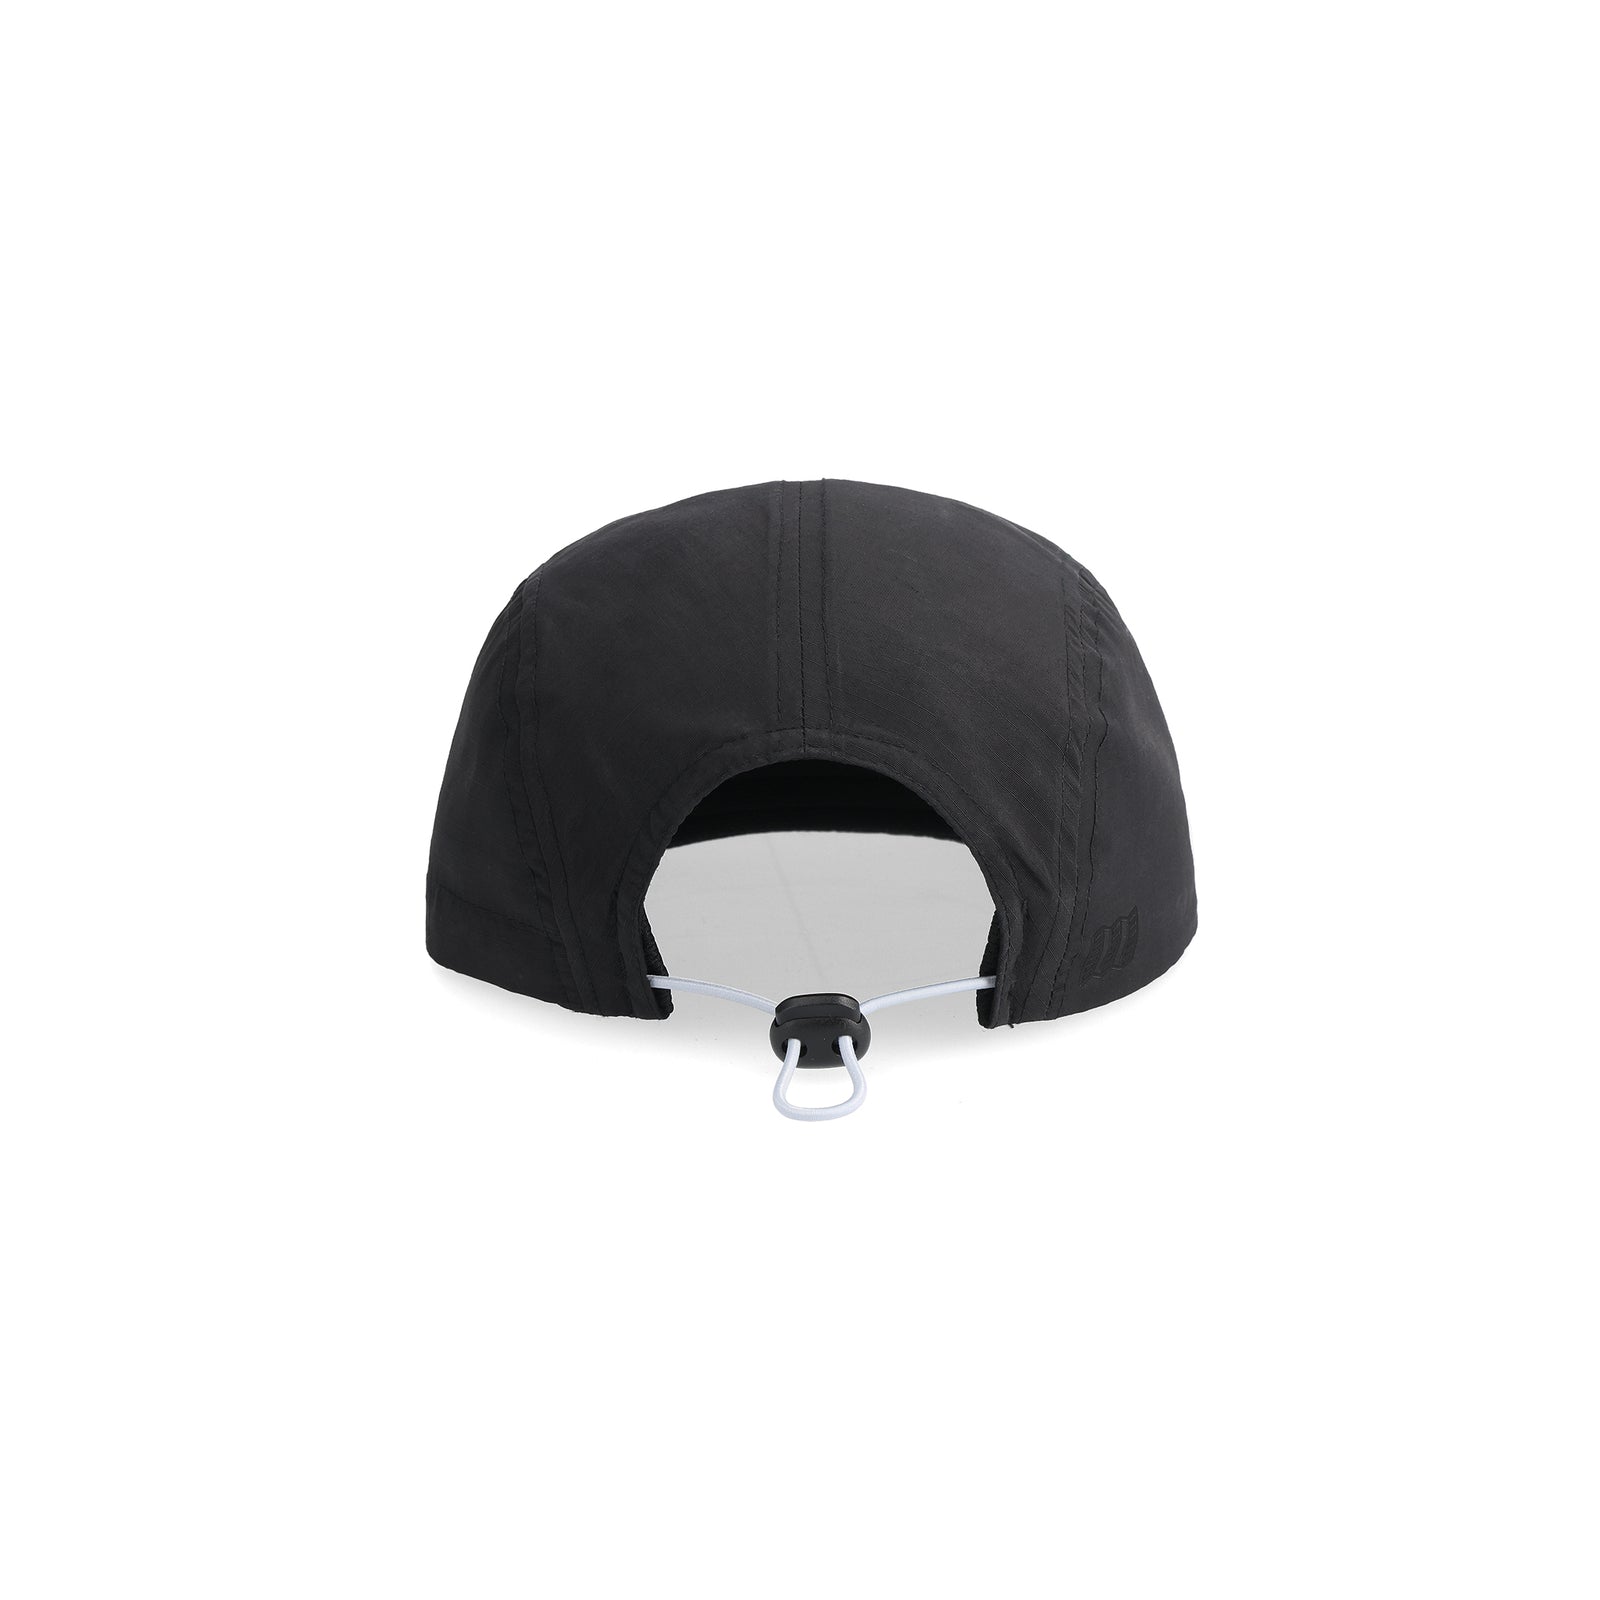 Back View of Topo Designs Global Packable Hat in "Black"